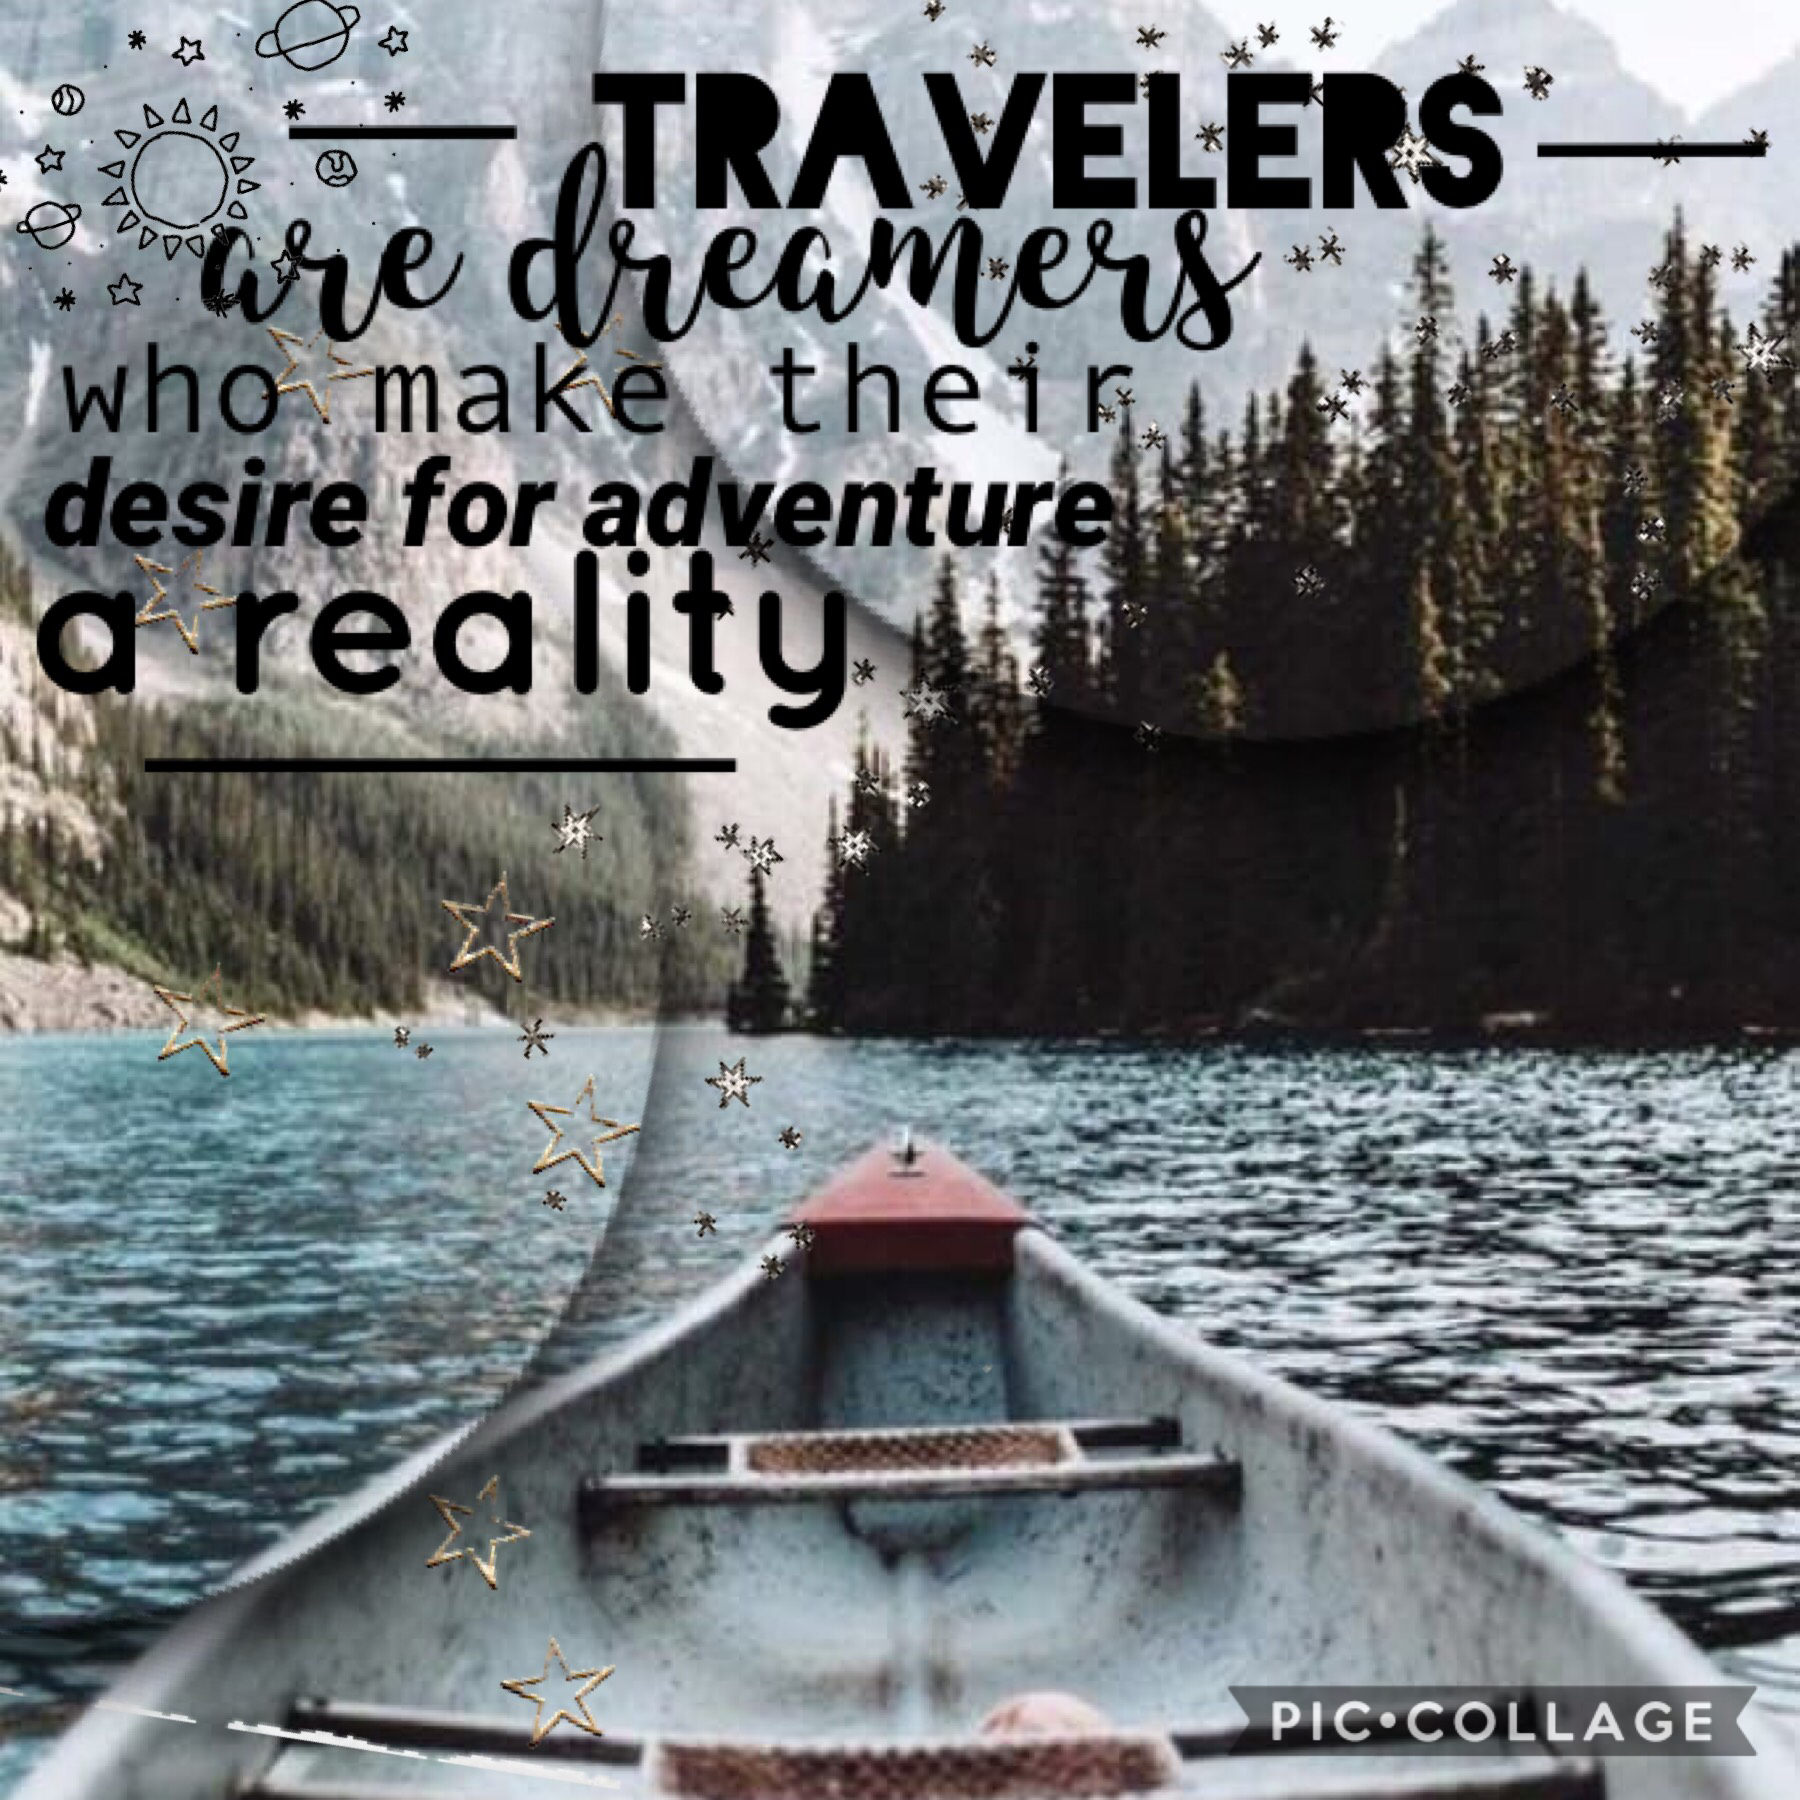 🛶Travelers are dreamers...🛶

This didn’t turn out so well :(